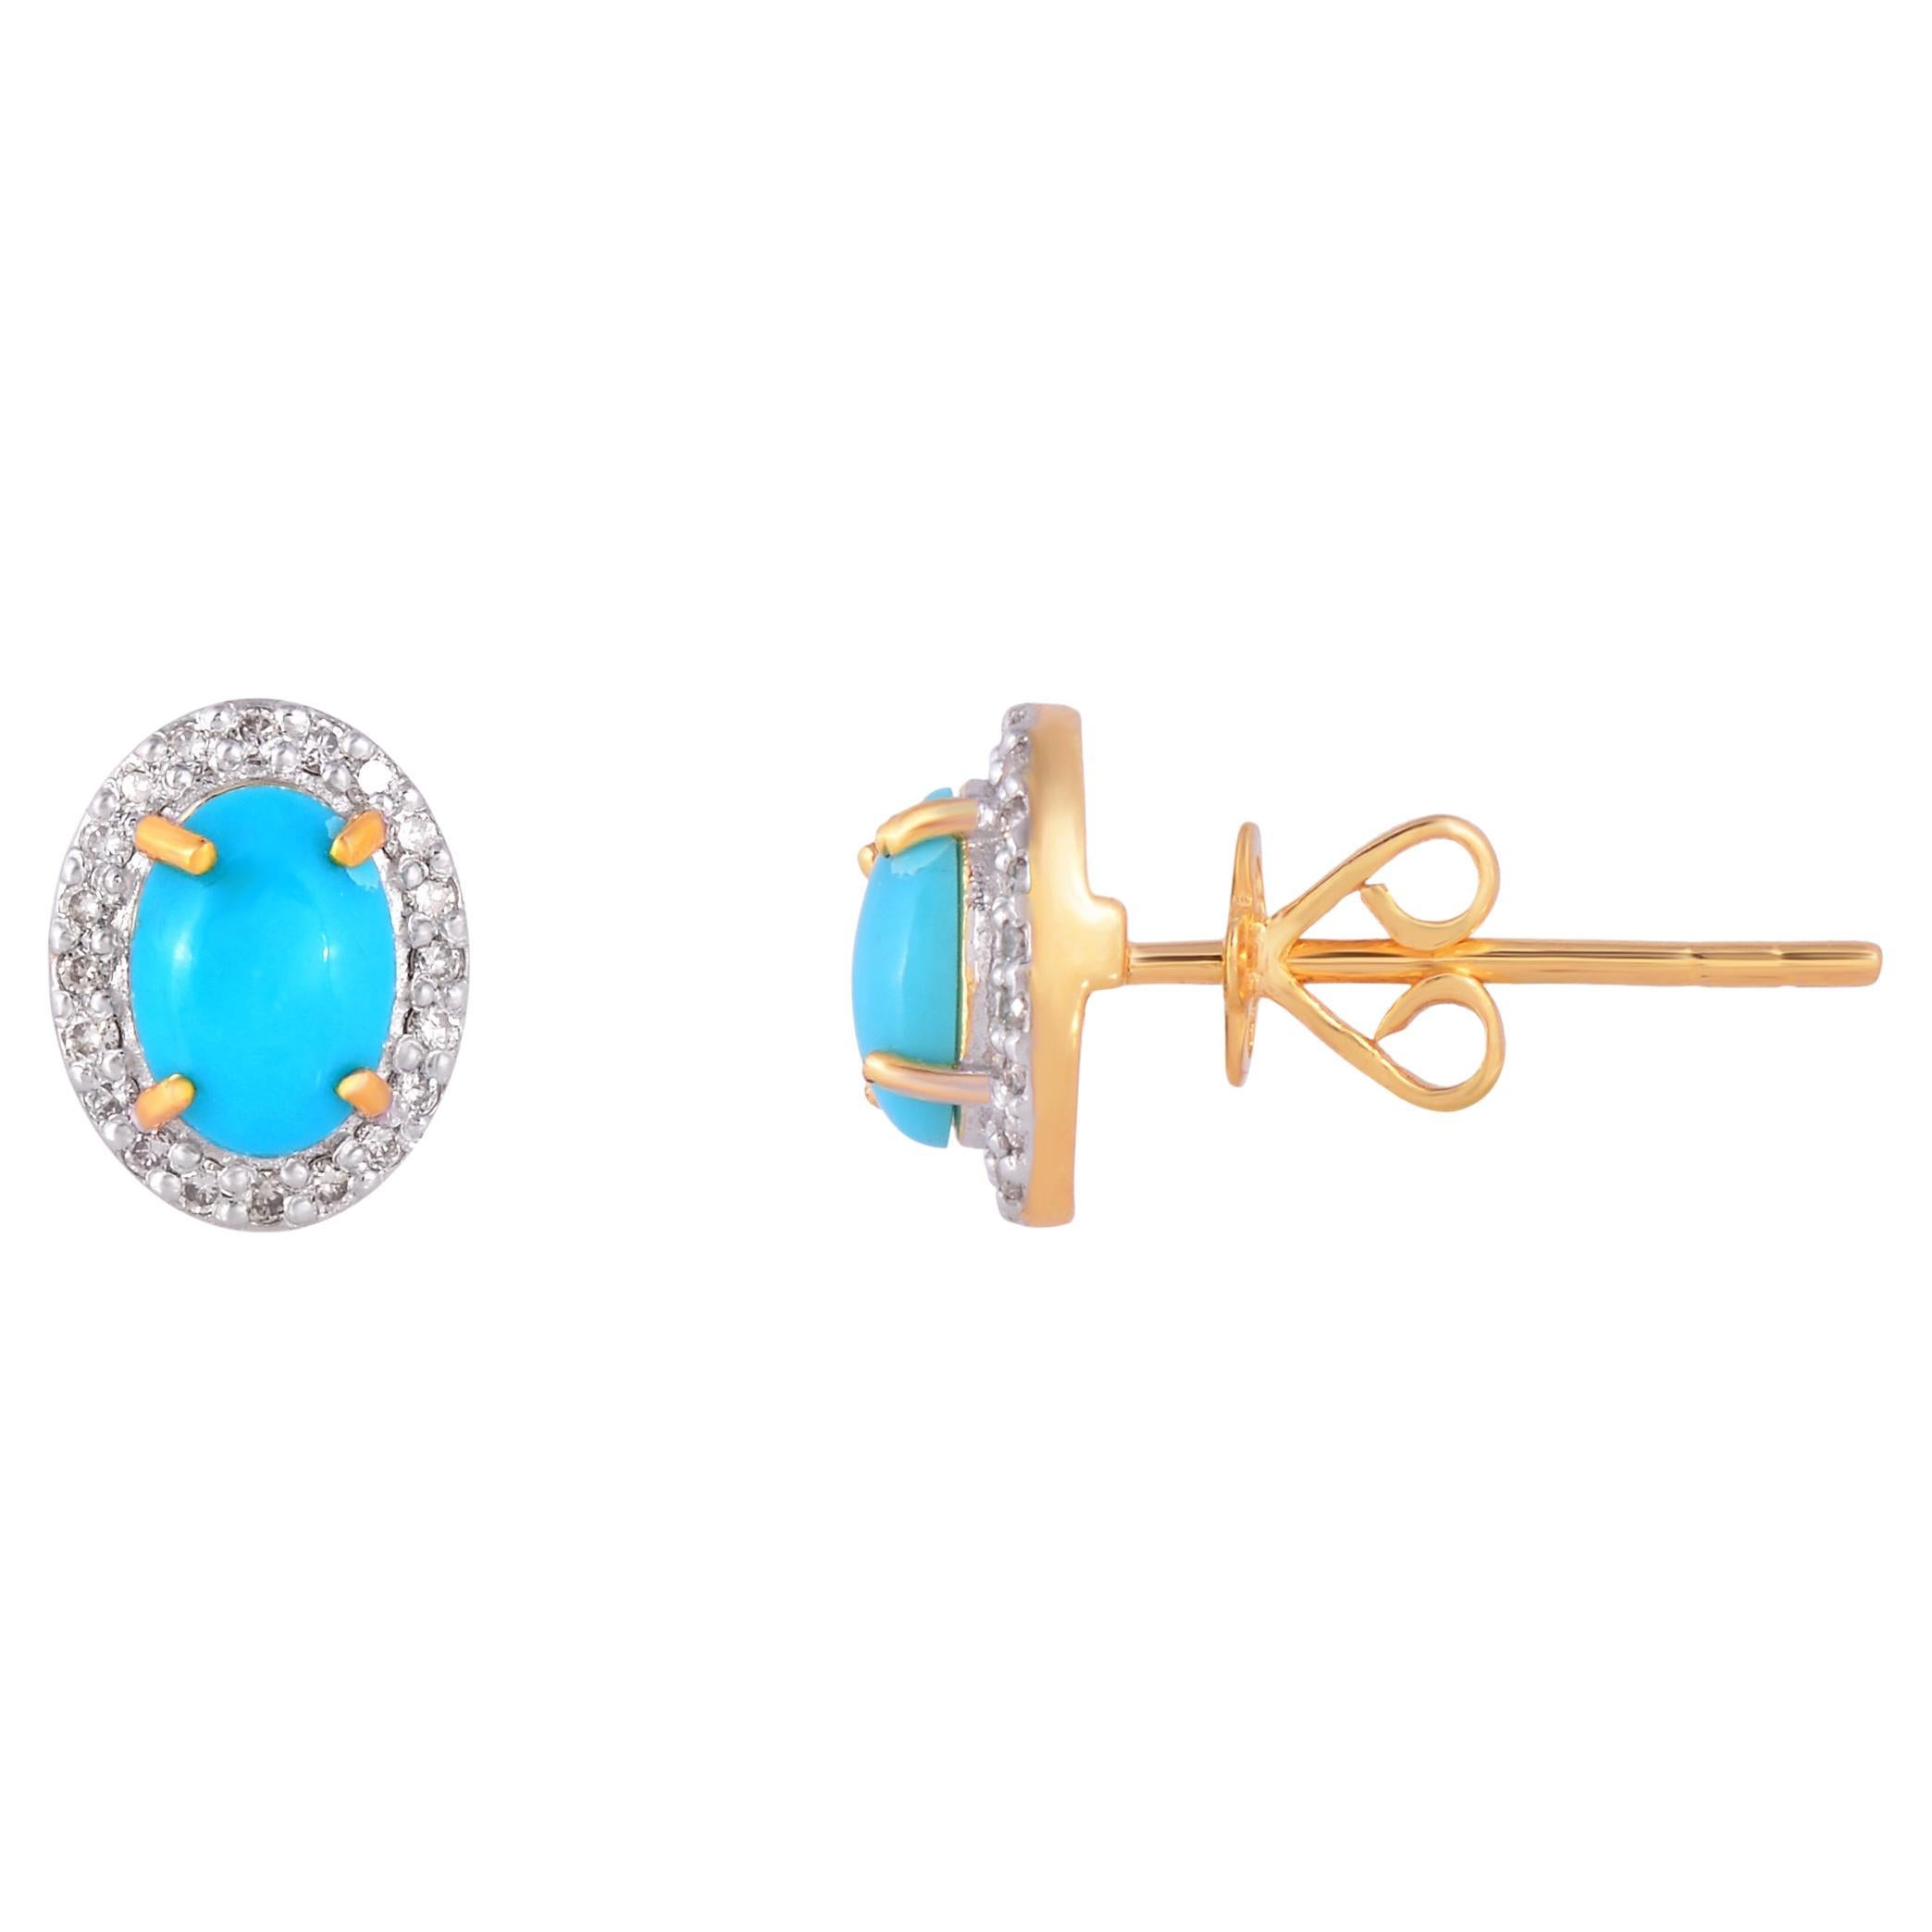 Turquoise Stud Earrings with Diamond in 18k Gold